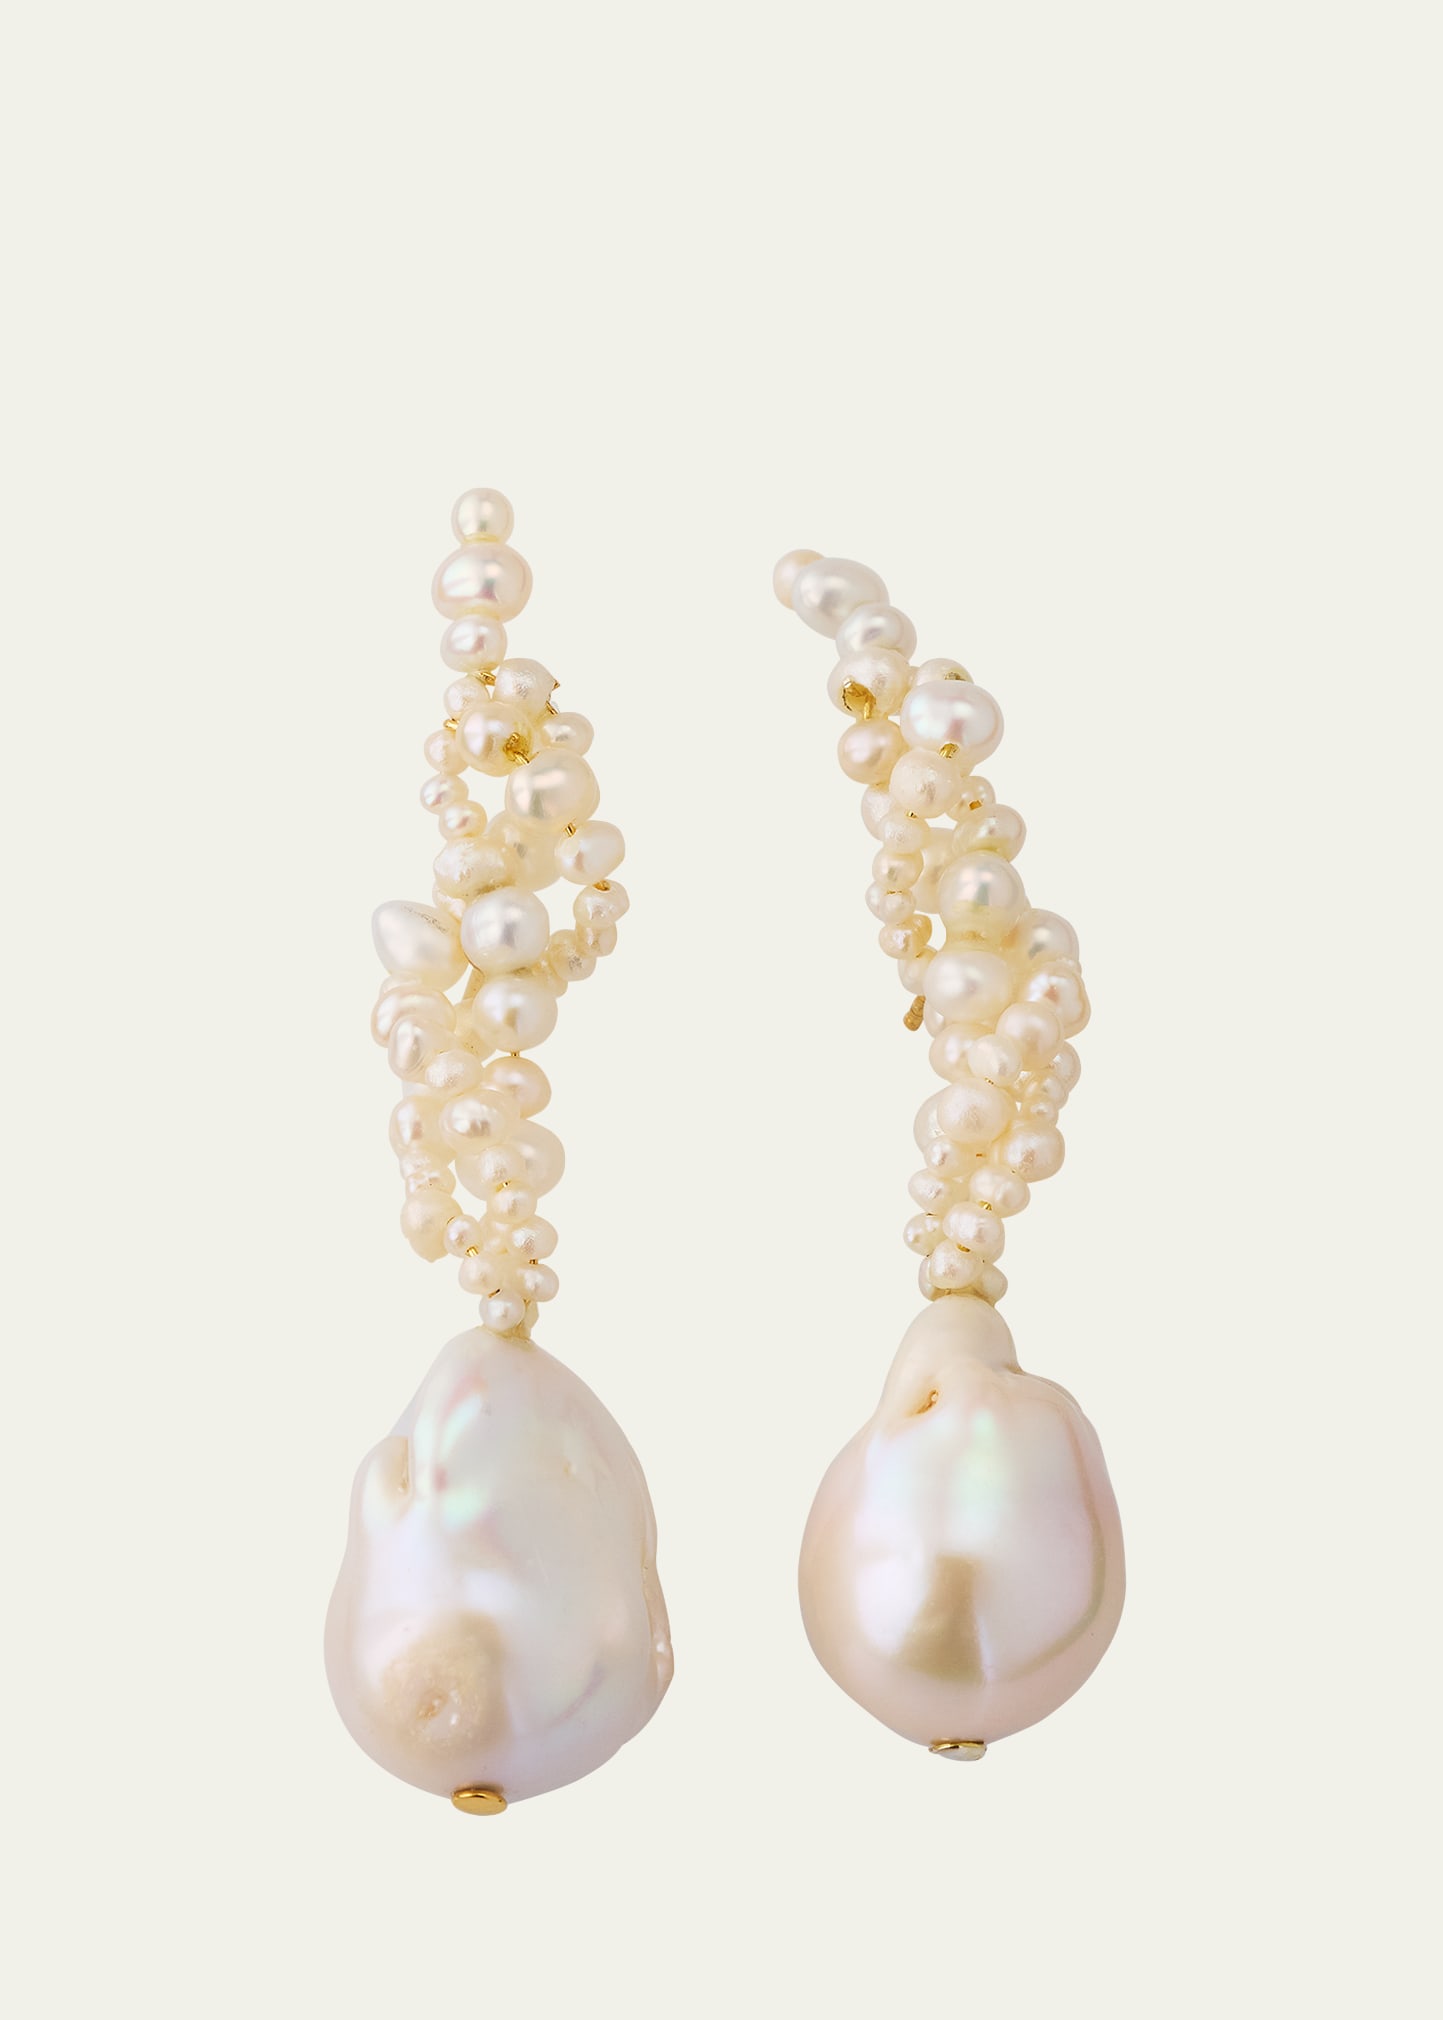 Completedworks Gotcha Gold Vermeil And Pearl Earrings